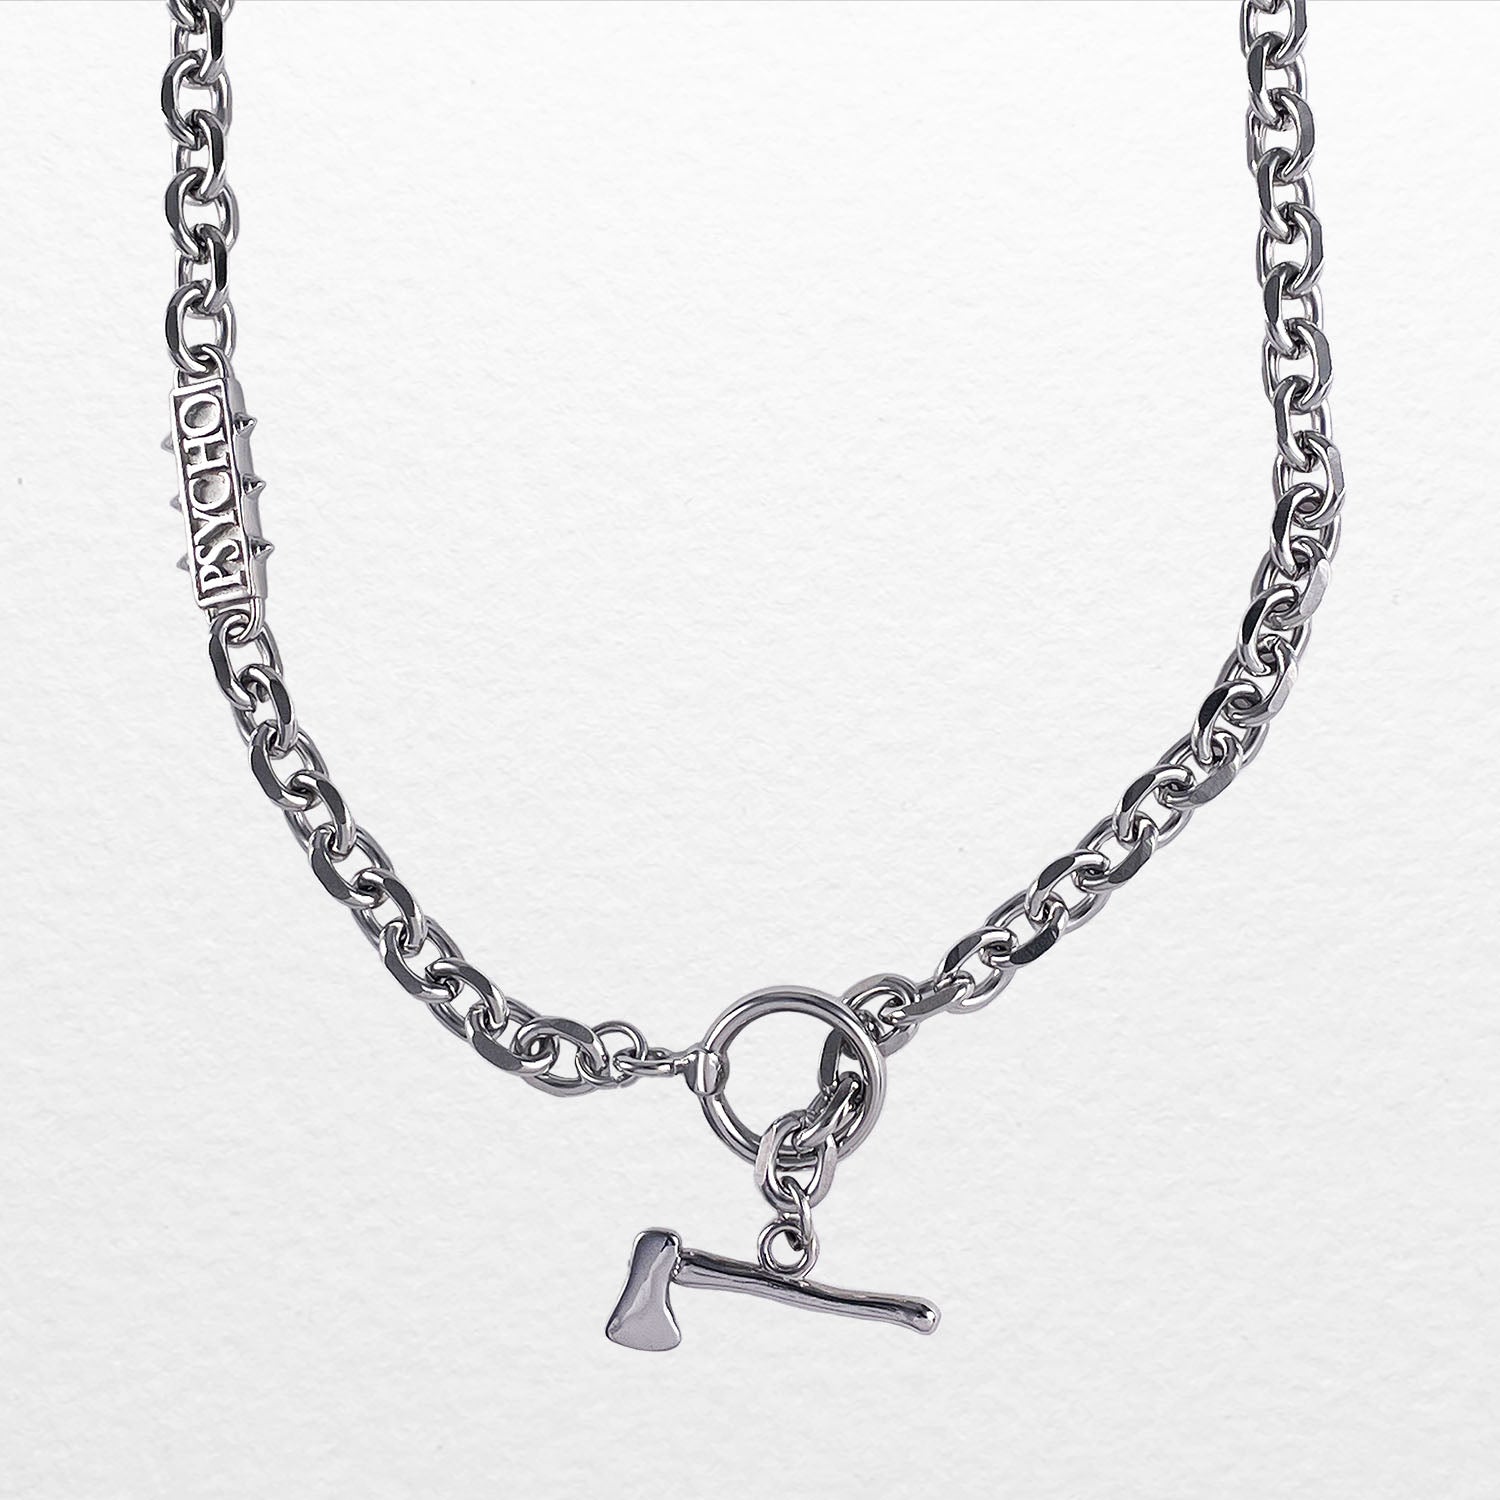 Personal Fears X American Psycho Axe Chain Necklace in Stainless Steel